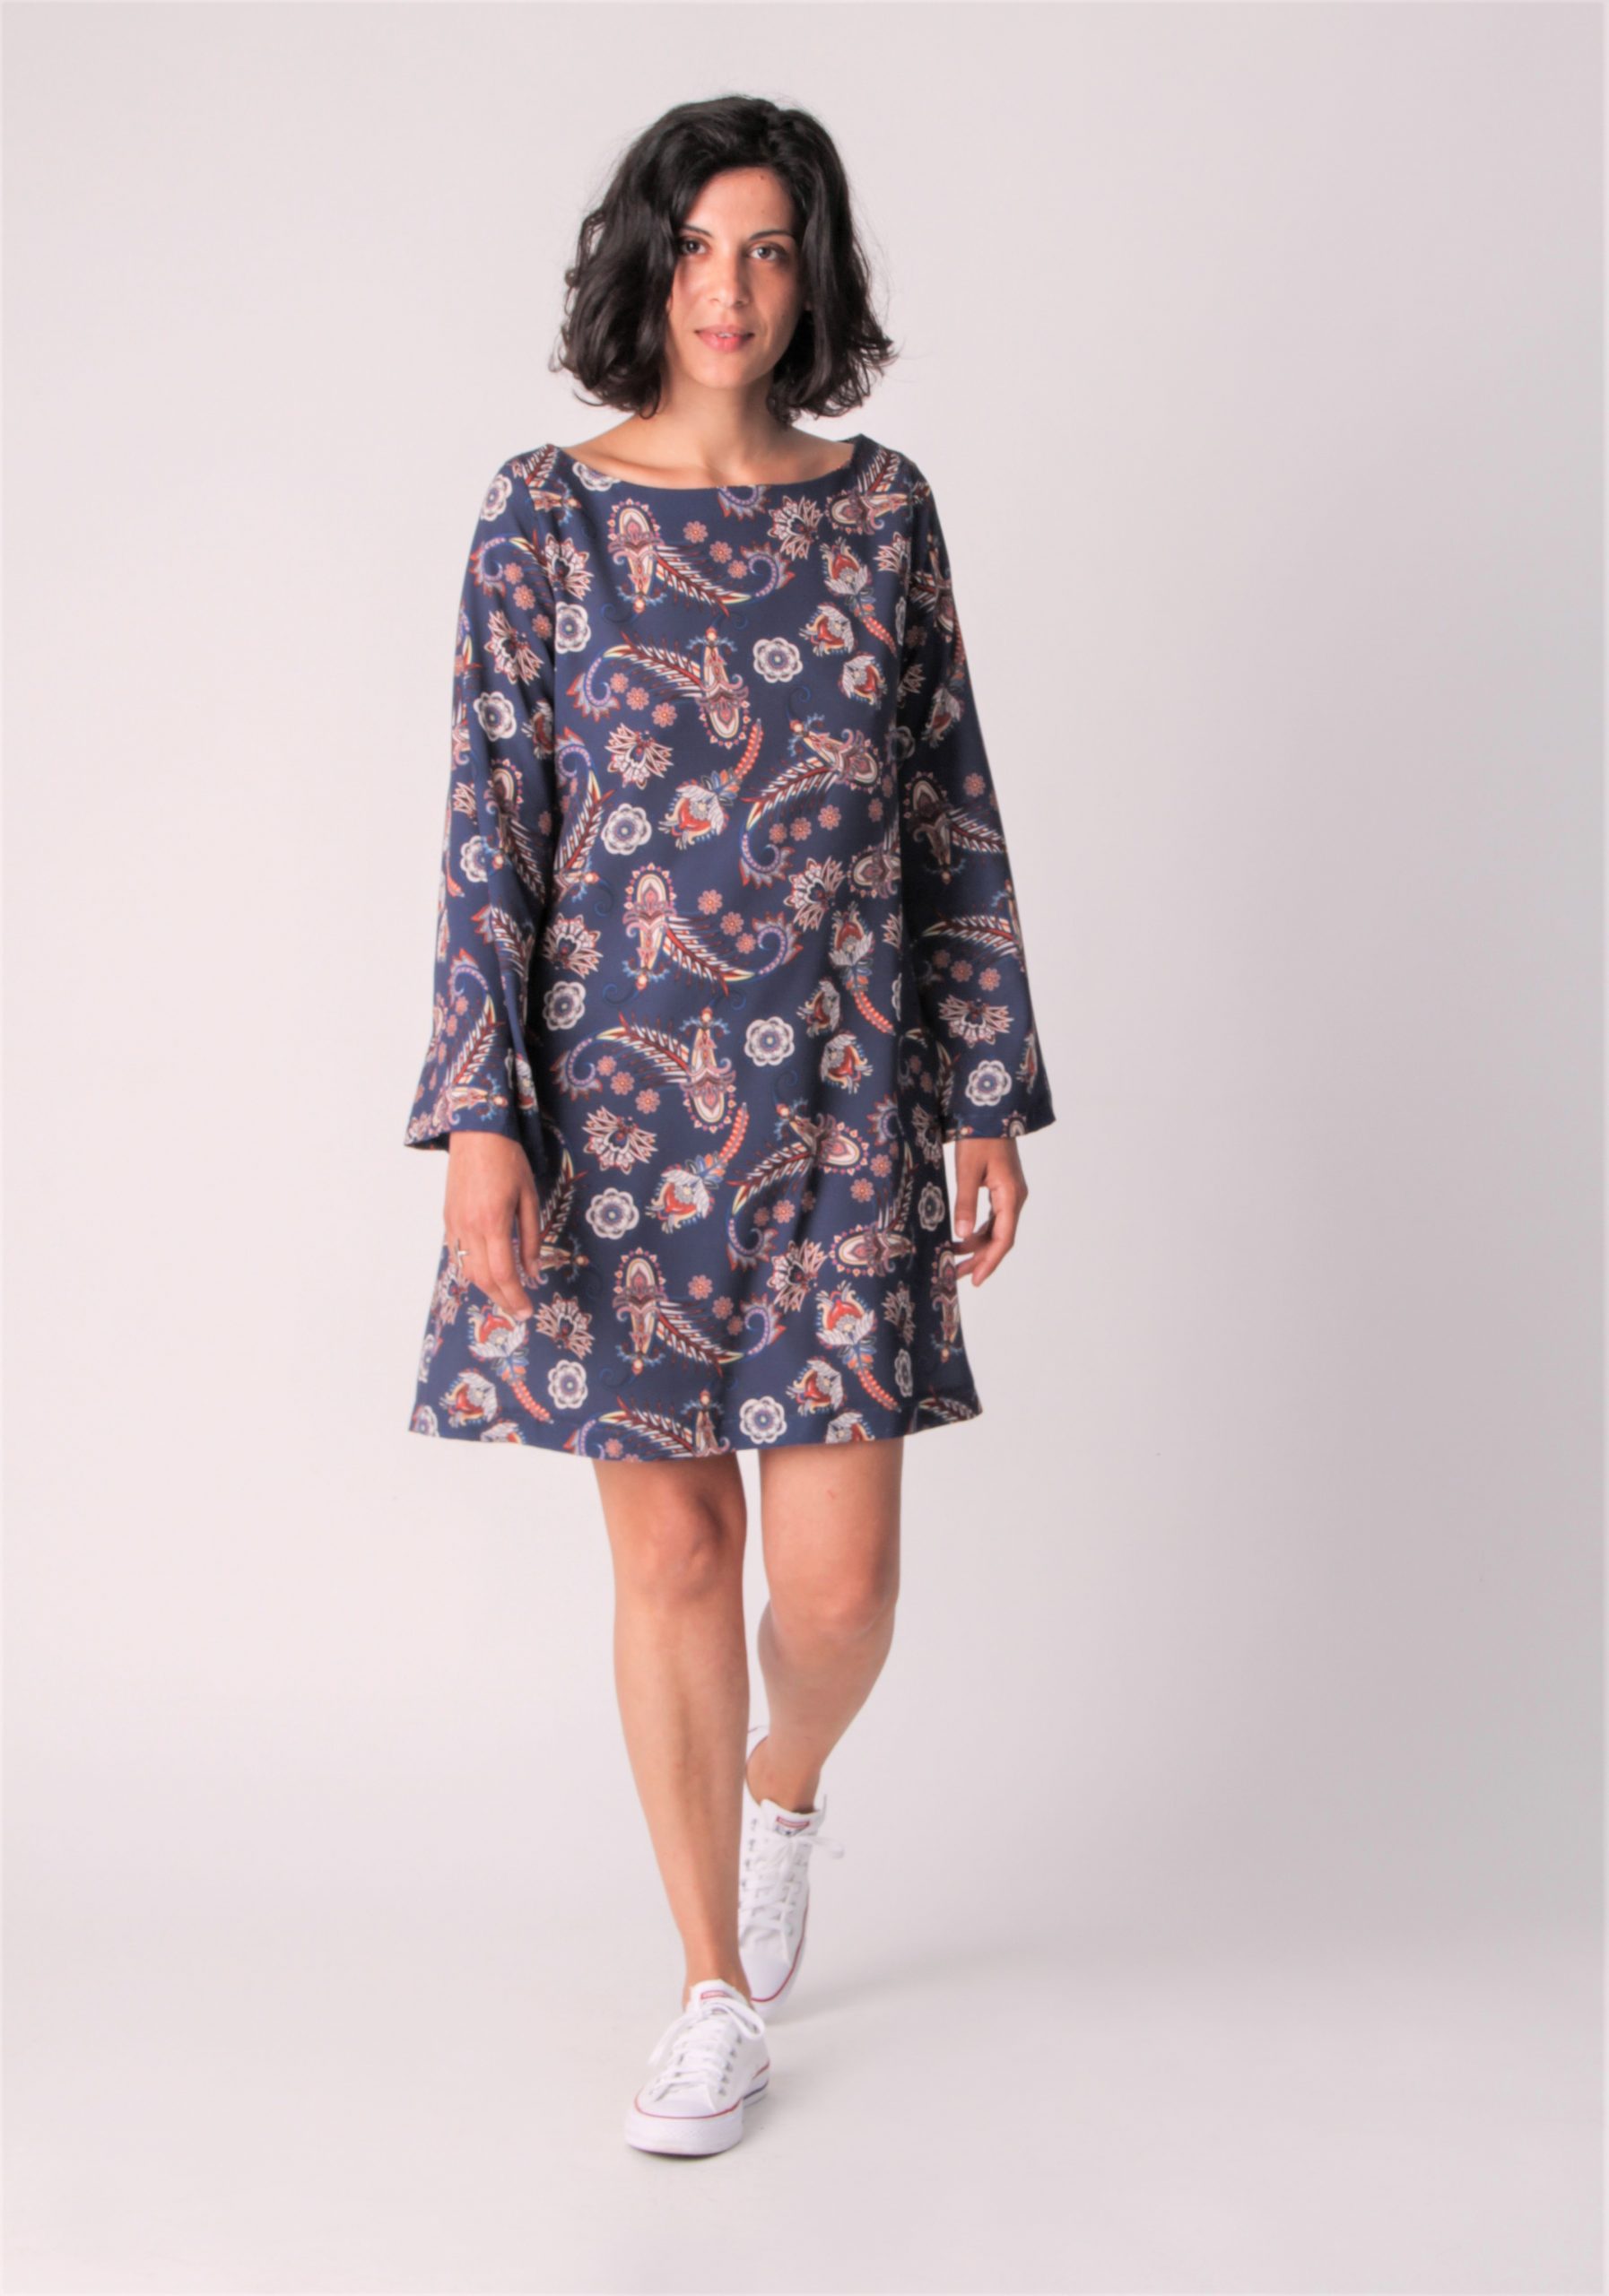 The Patterns Room Pansy Dress and Top